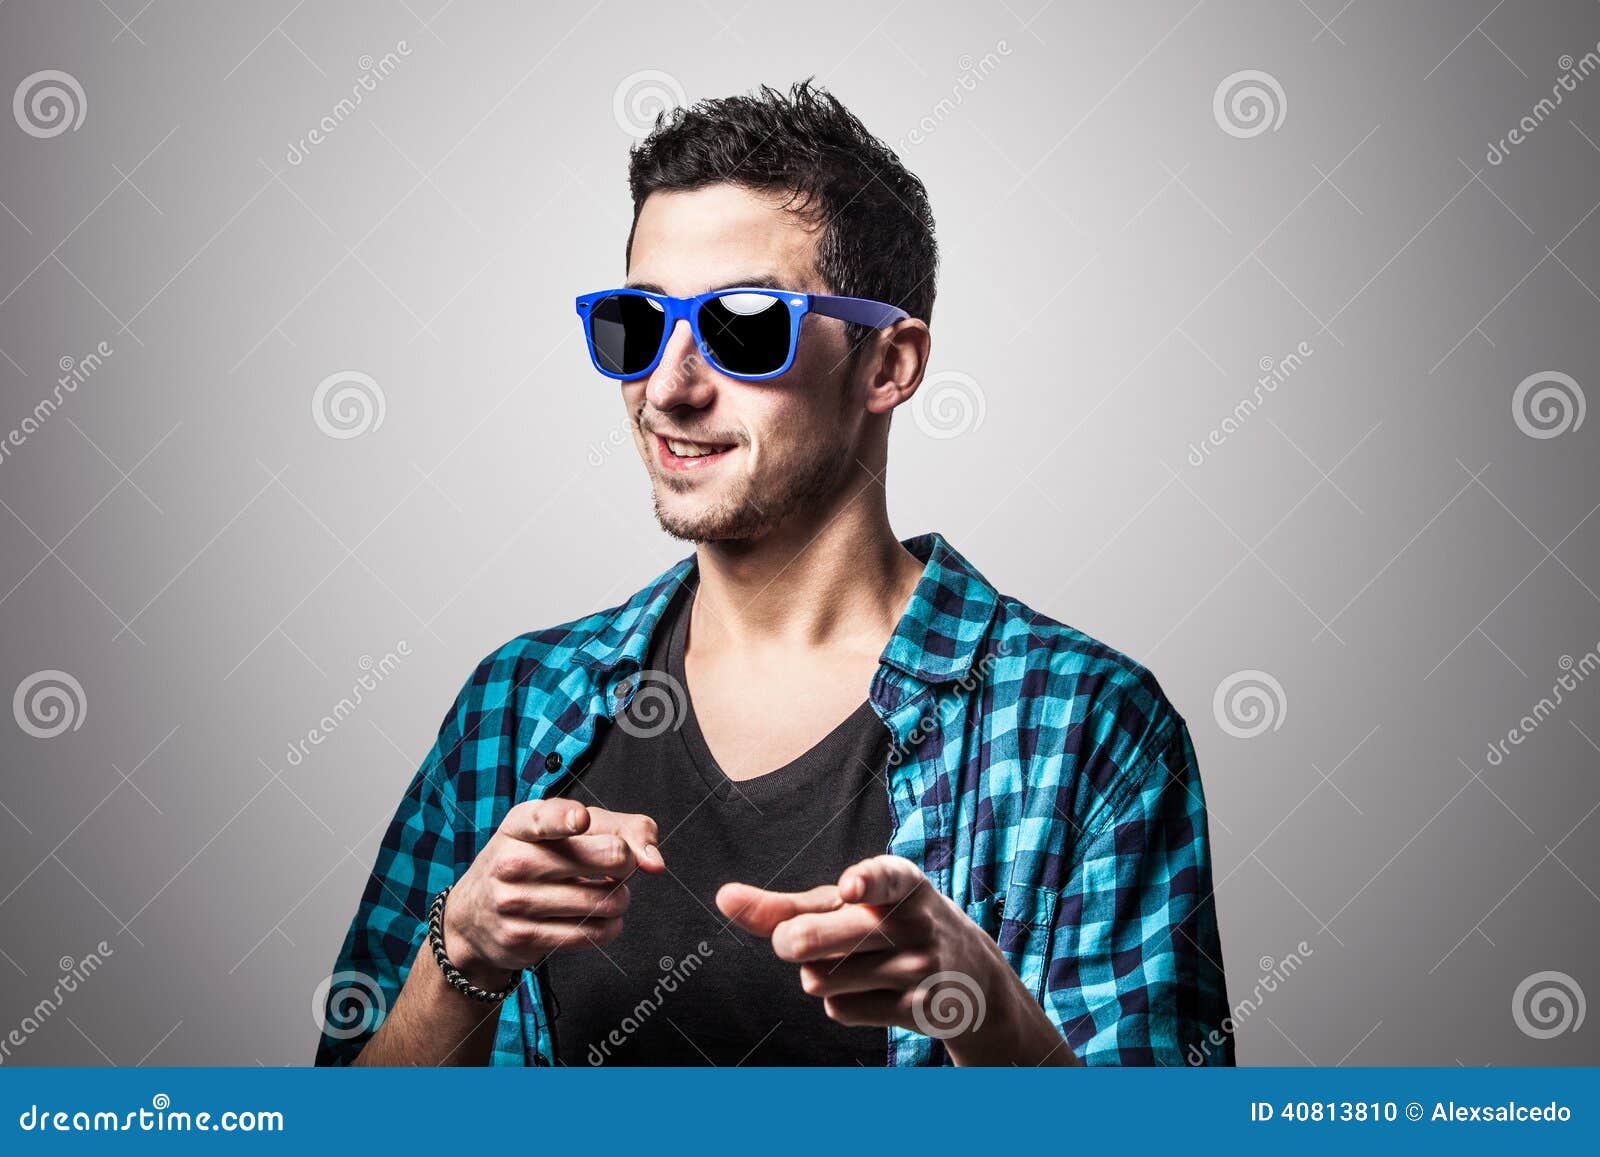 Cool boy stock photo. Image of funny, casual, expression - 40813810